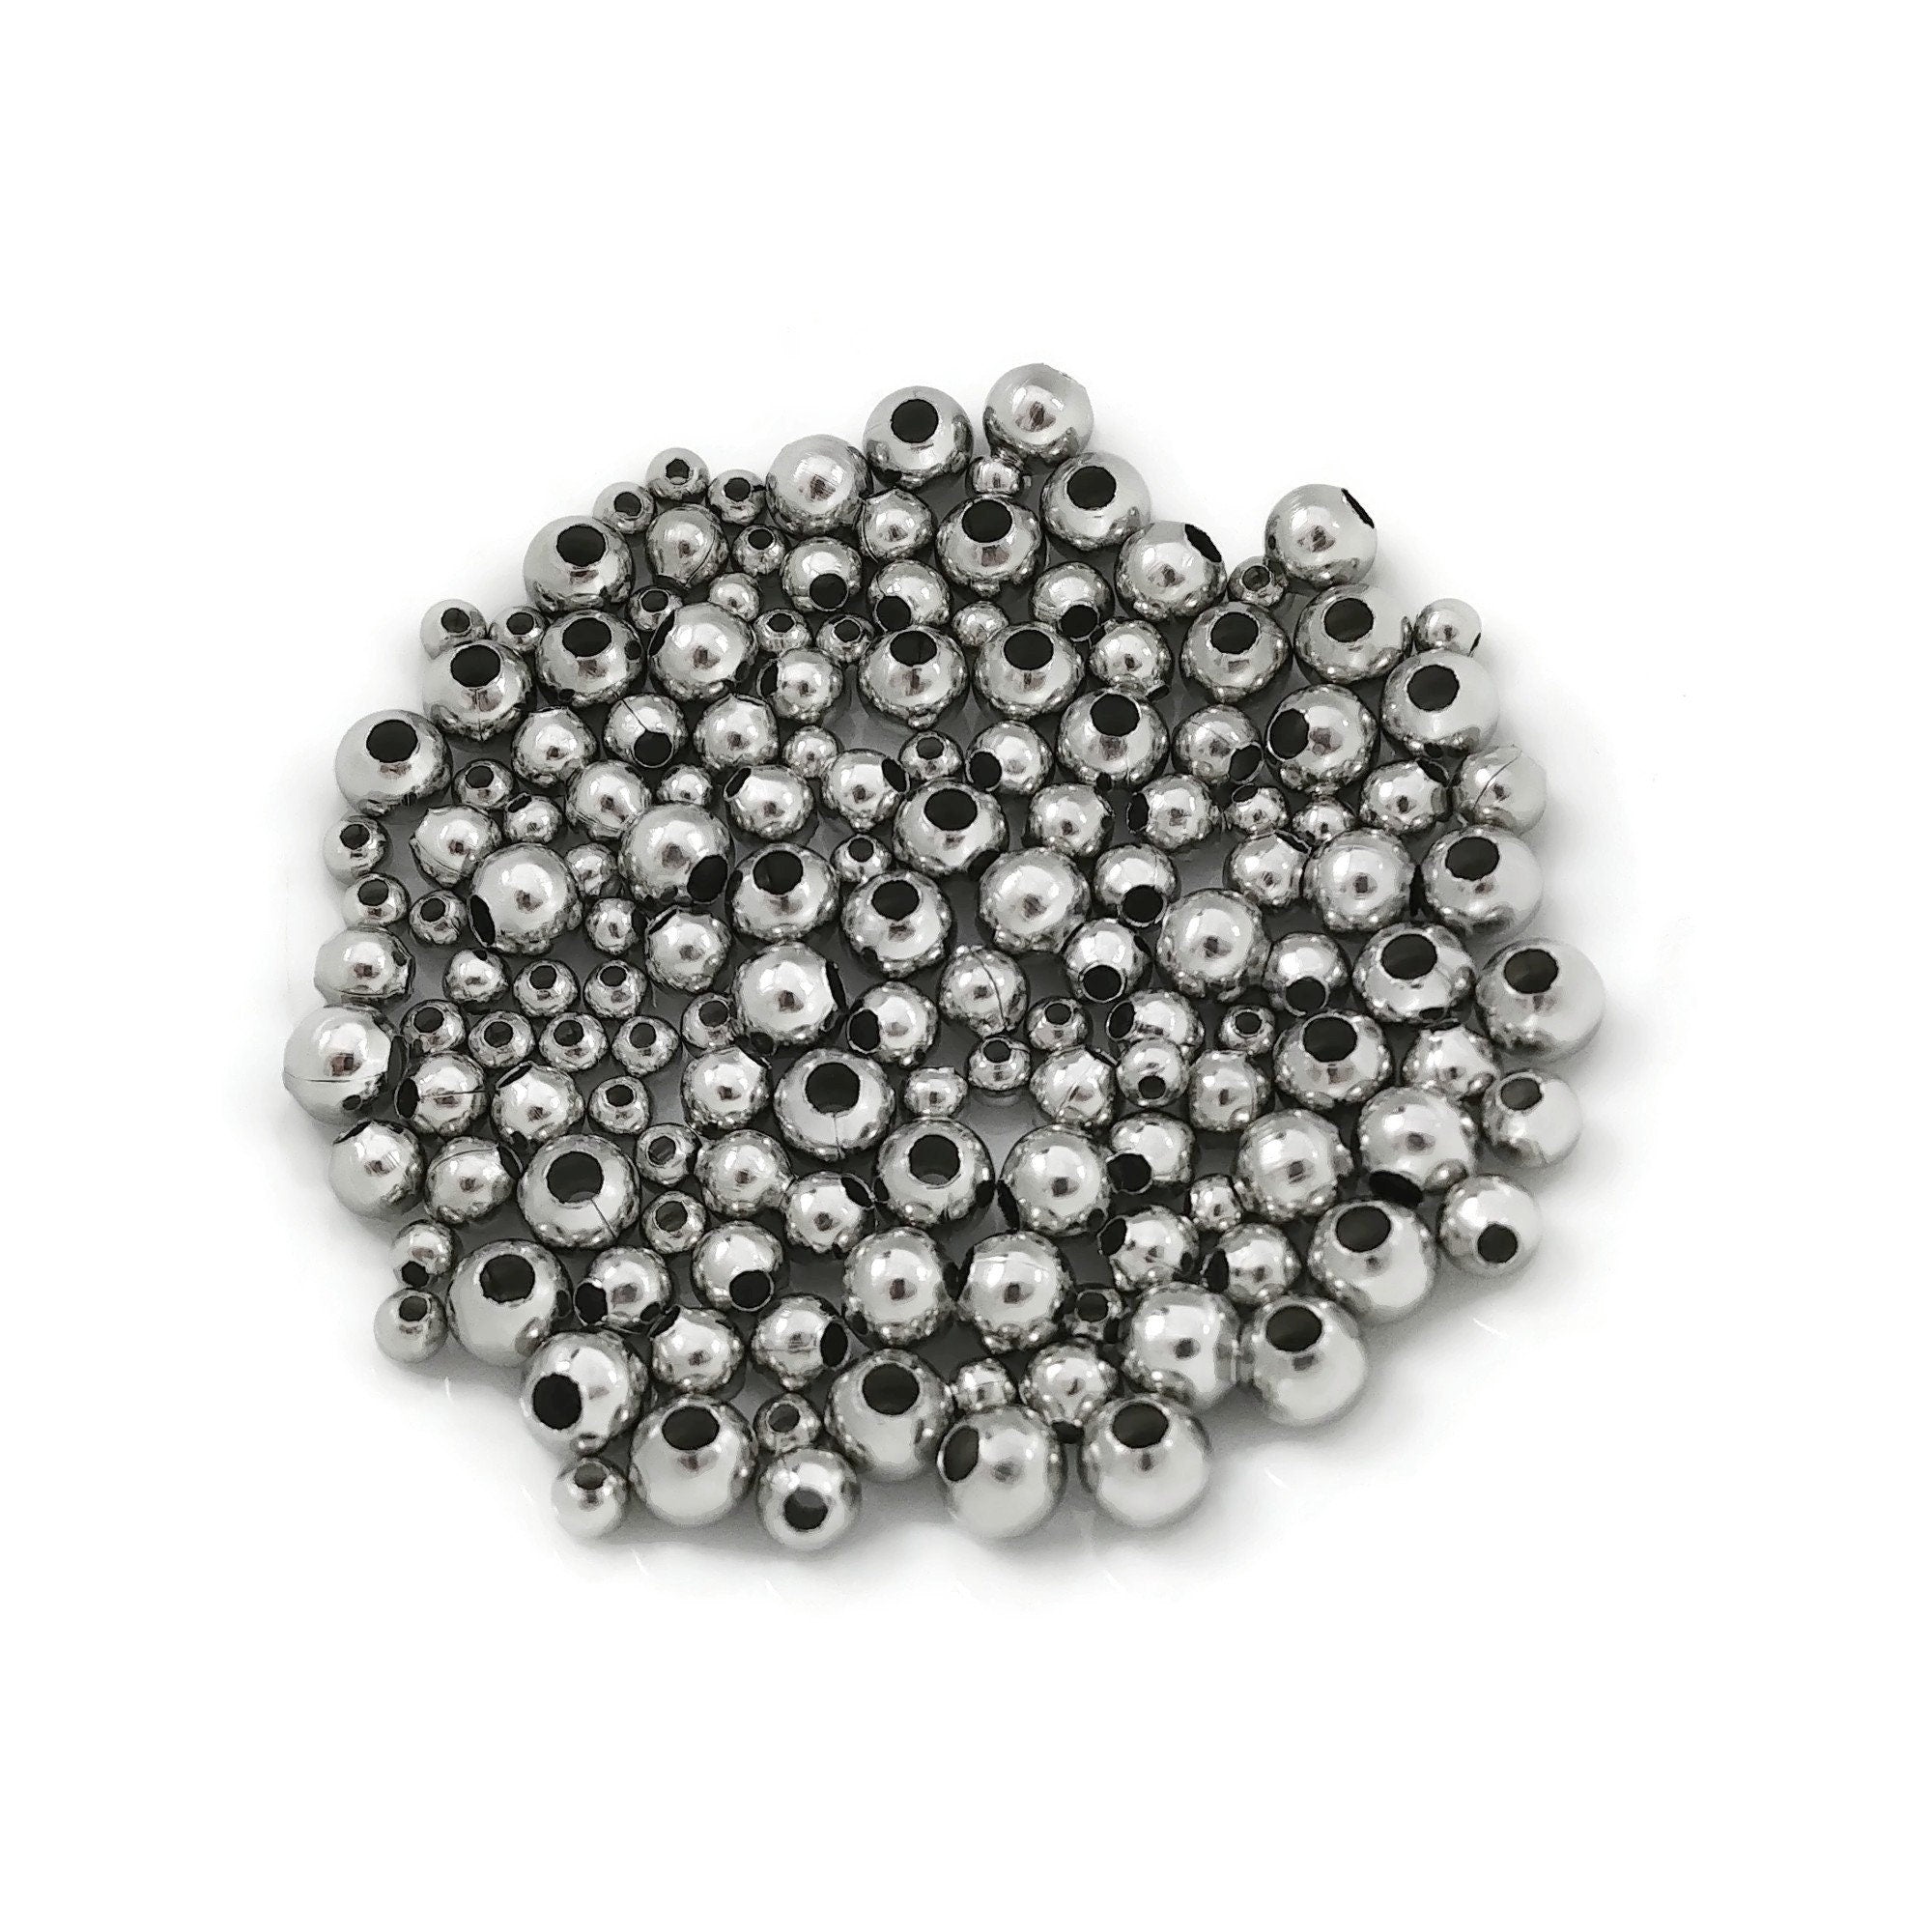 Metal Beads - Large Hole Beads - Spacer Beads - 7mm Spacer Bead - Silver  Spacers - Metal Spacers - 20pcs - (5117)